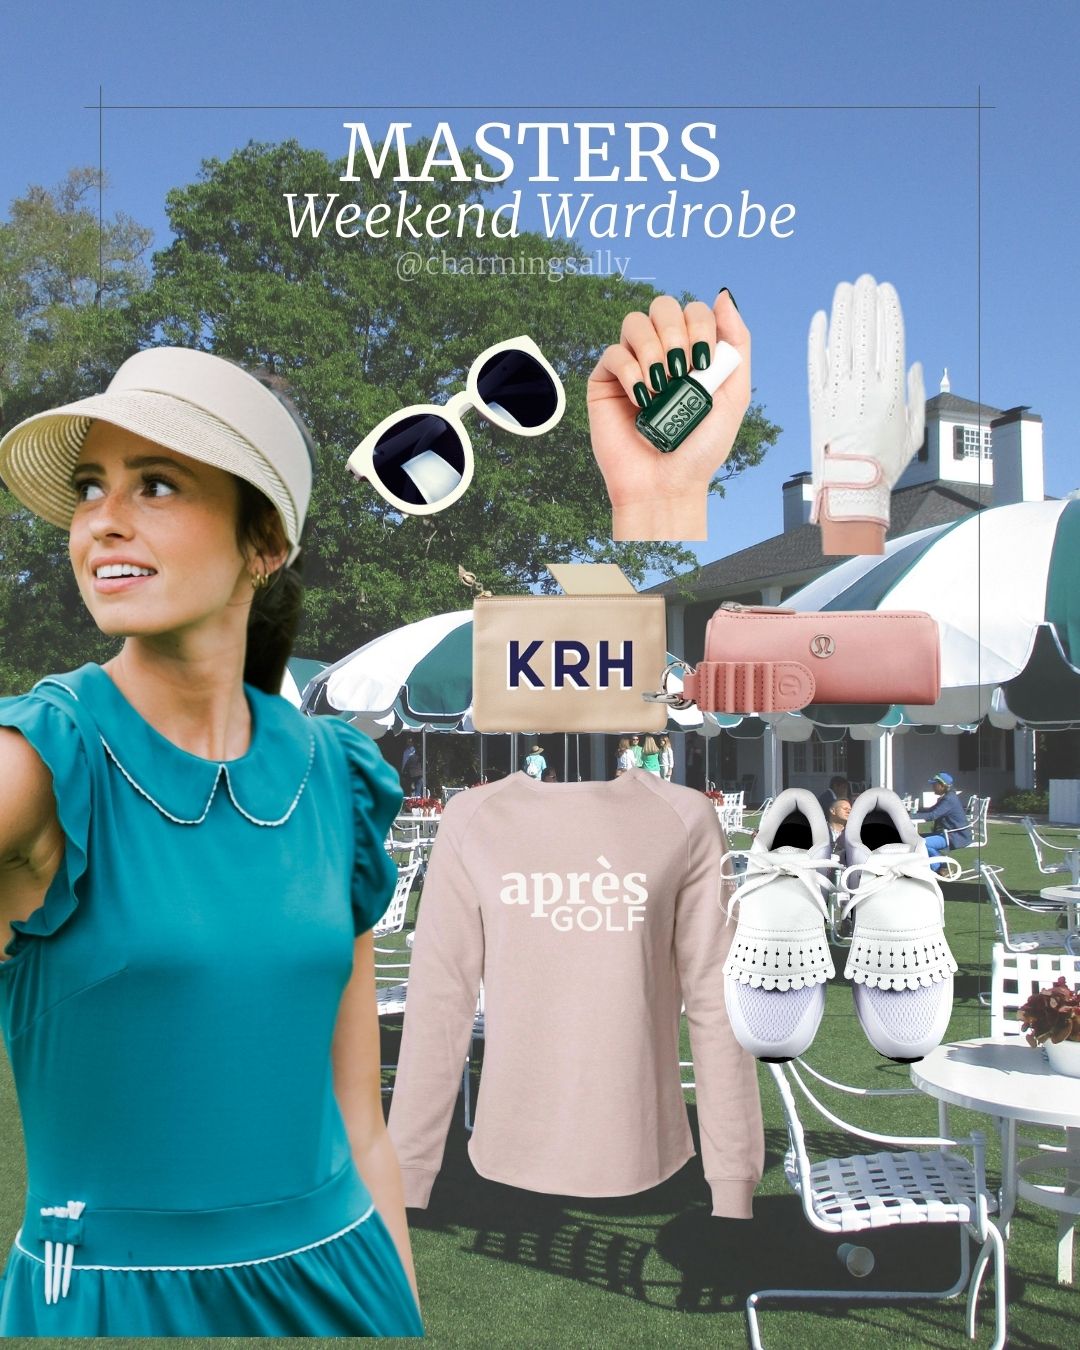 Dress to Impress: The Ultimate Guide to Women's Fashion at the Masters